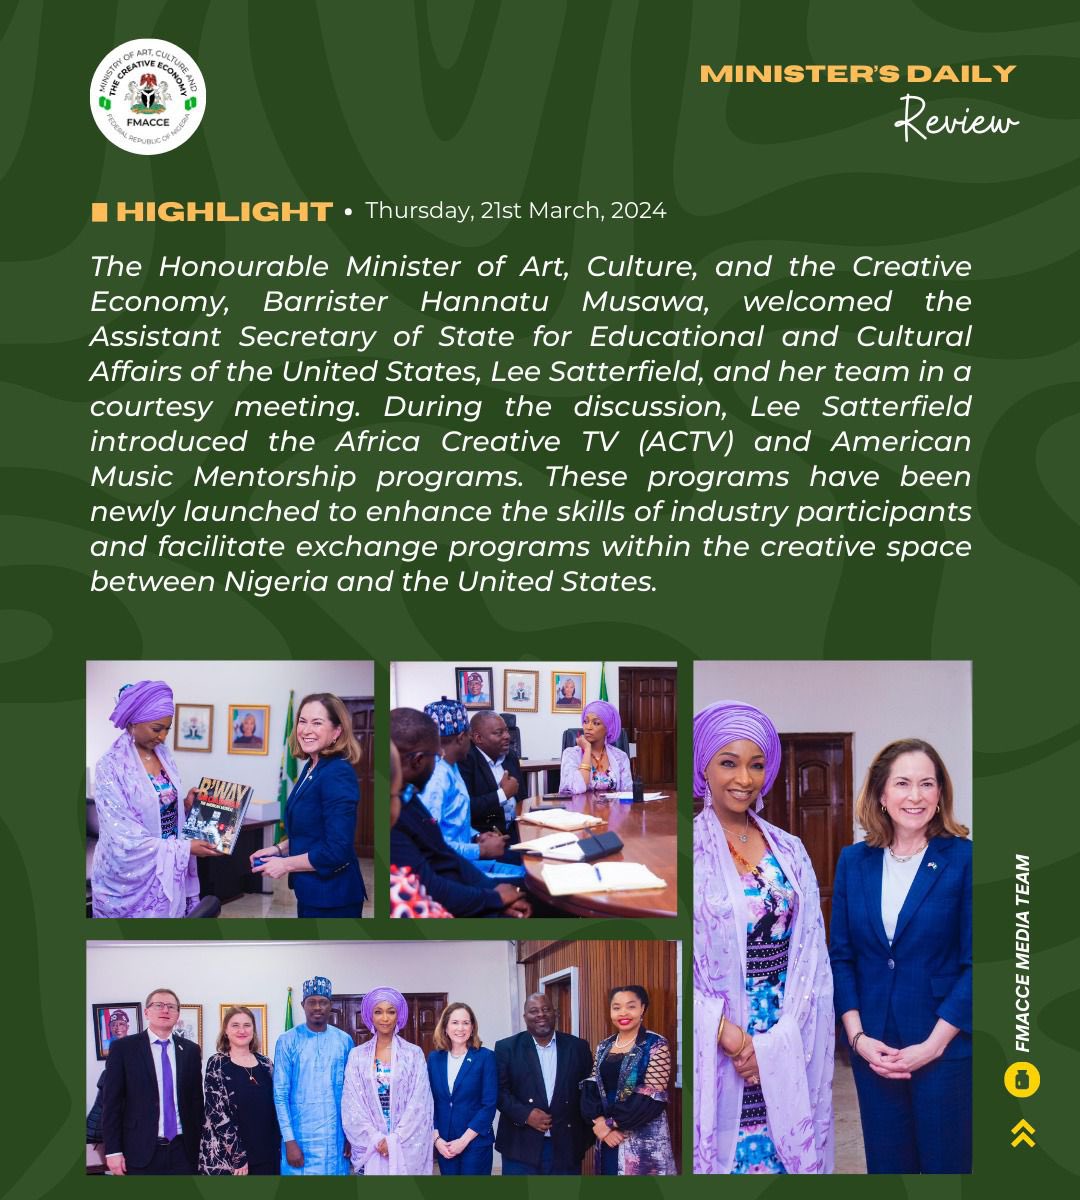 Culture exchange! 🇳🇬🇺🇸 Minister @hanneymusawa meets with US official Lee Satterfield to discuss African Creative TV & American Music programs & boosting the creative industries. #CultureConnects #FMACCENigeria